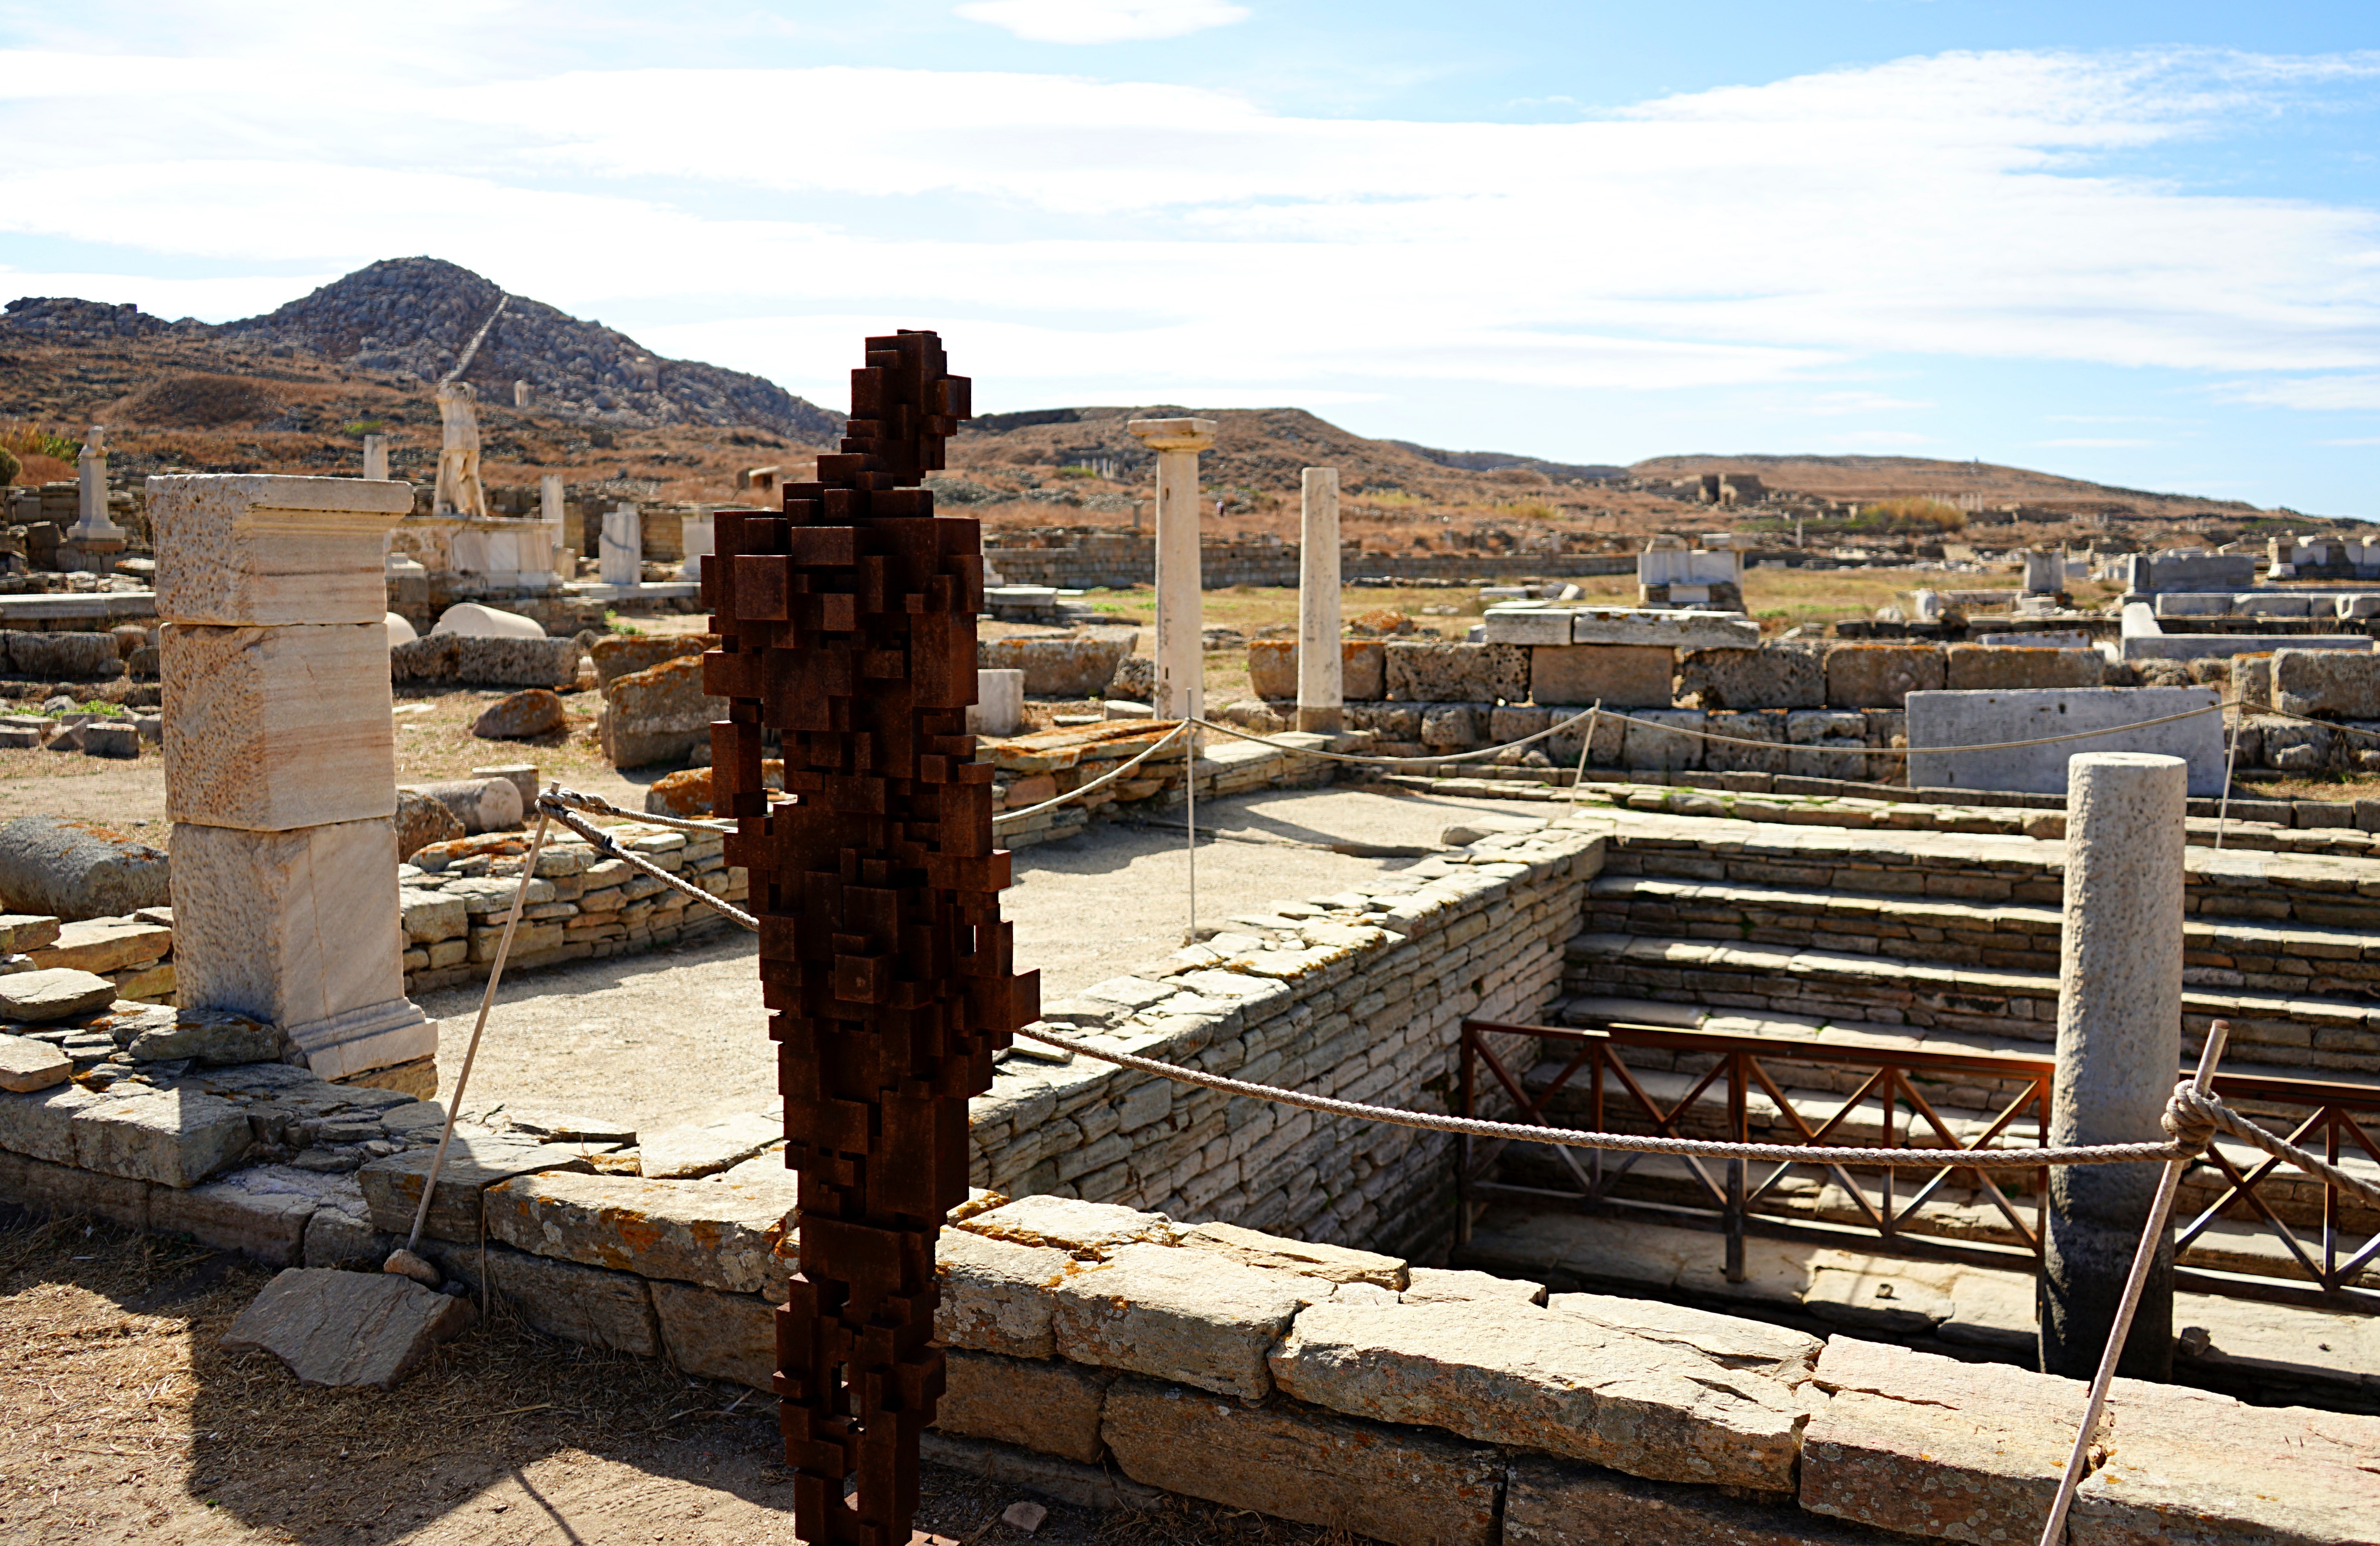 The new sculpture by the water in Delos